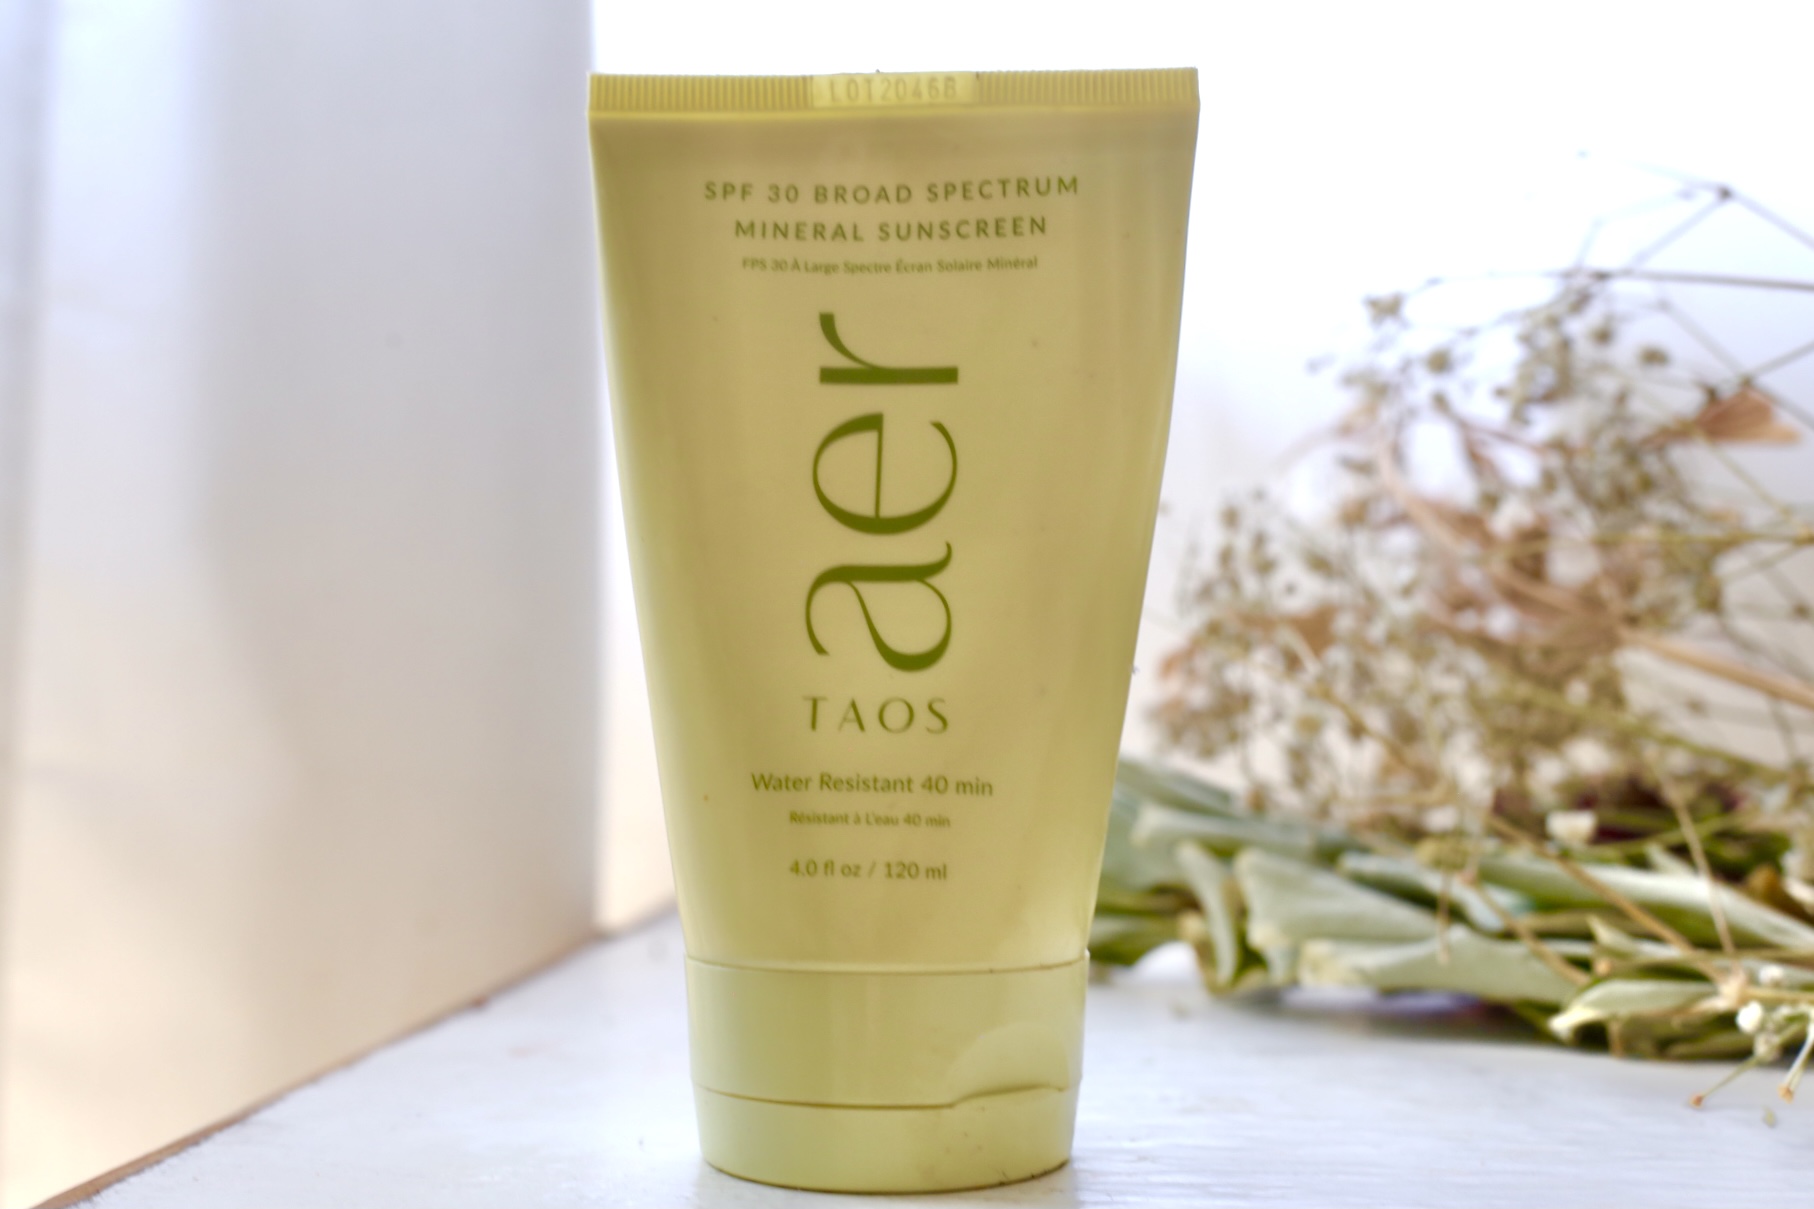 Taos Aer Mineral Sunscreen